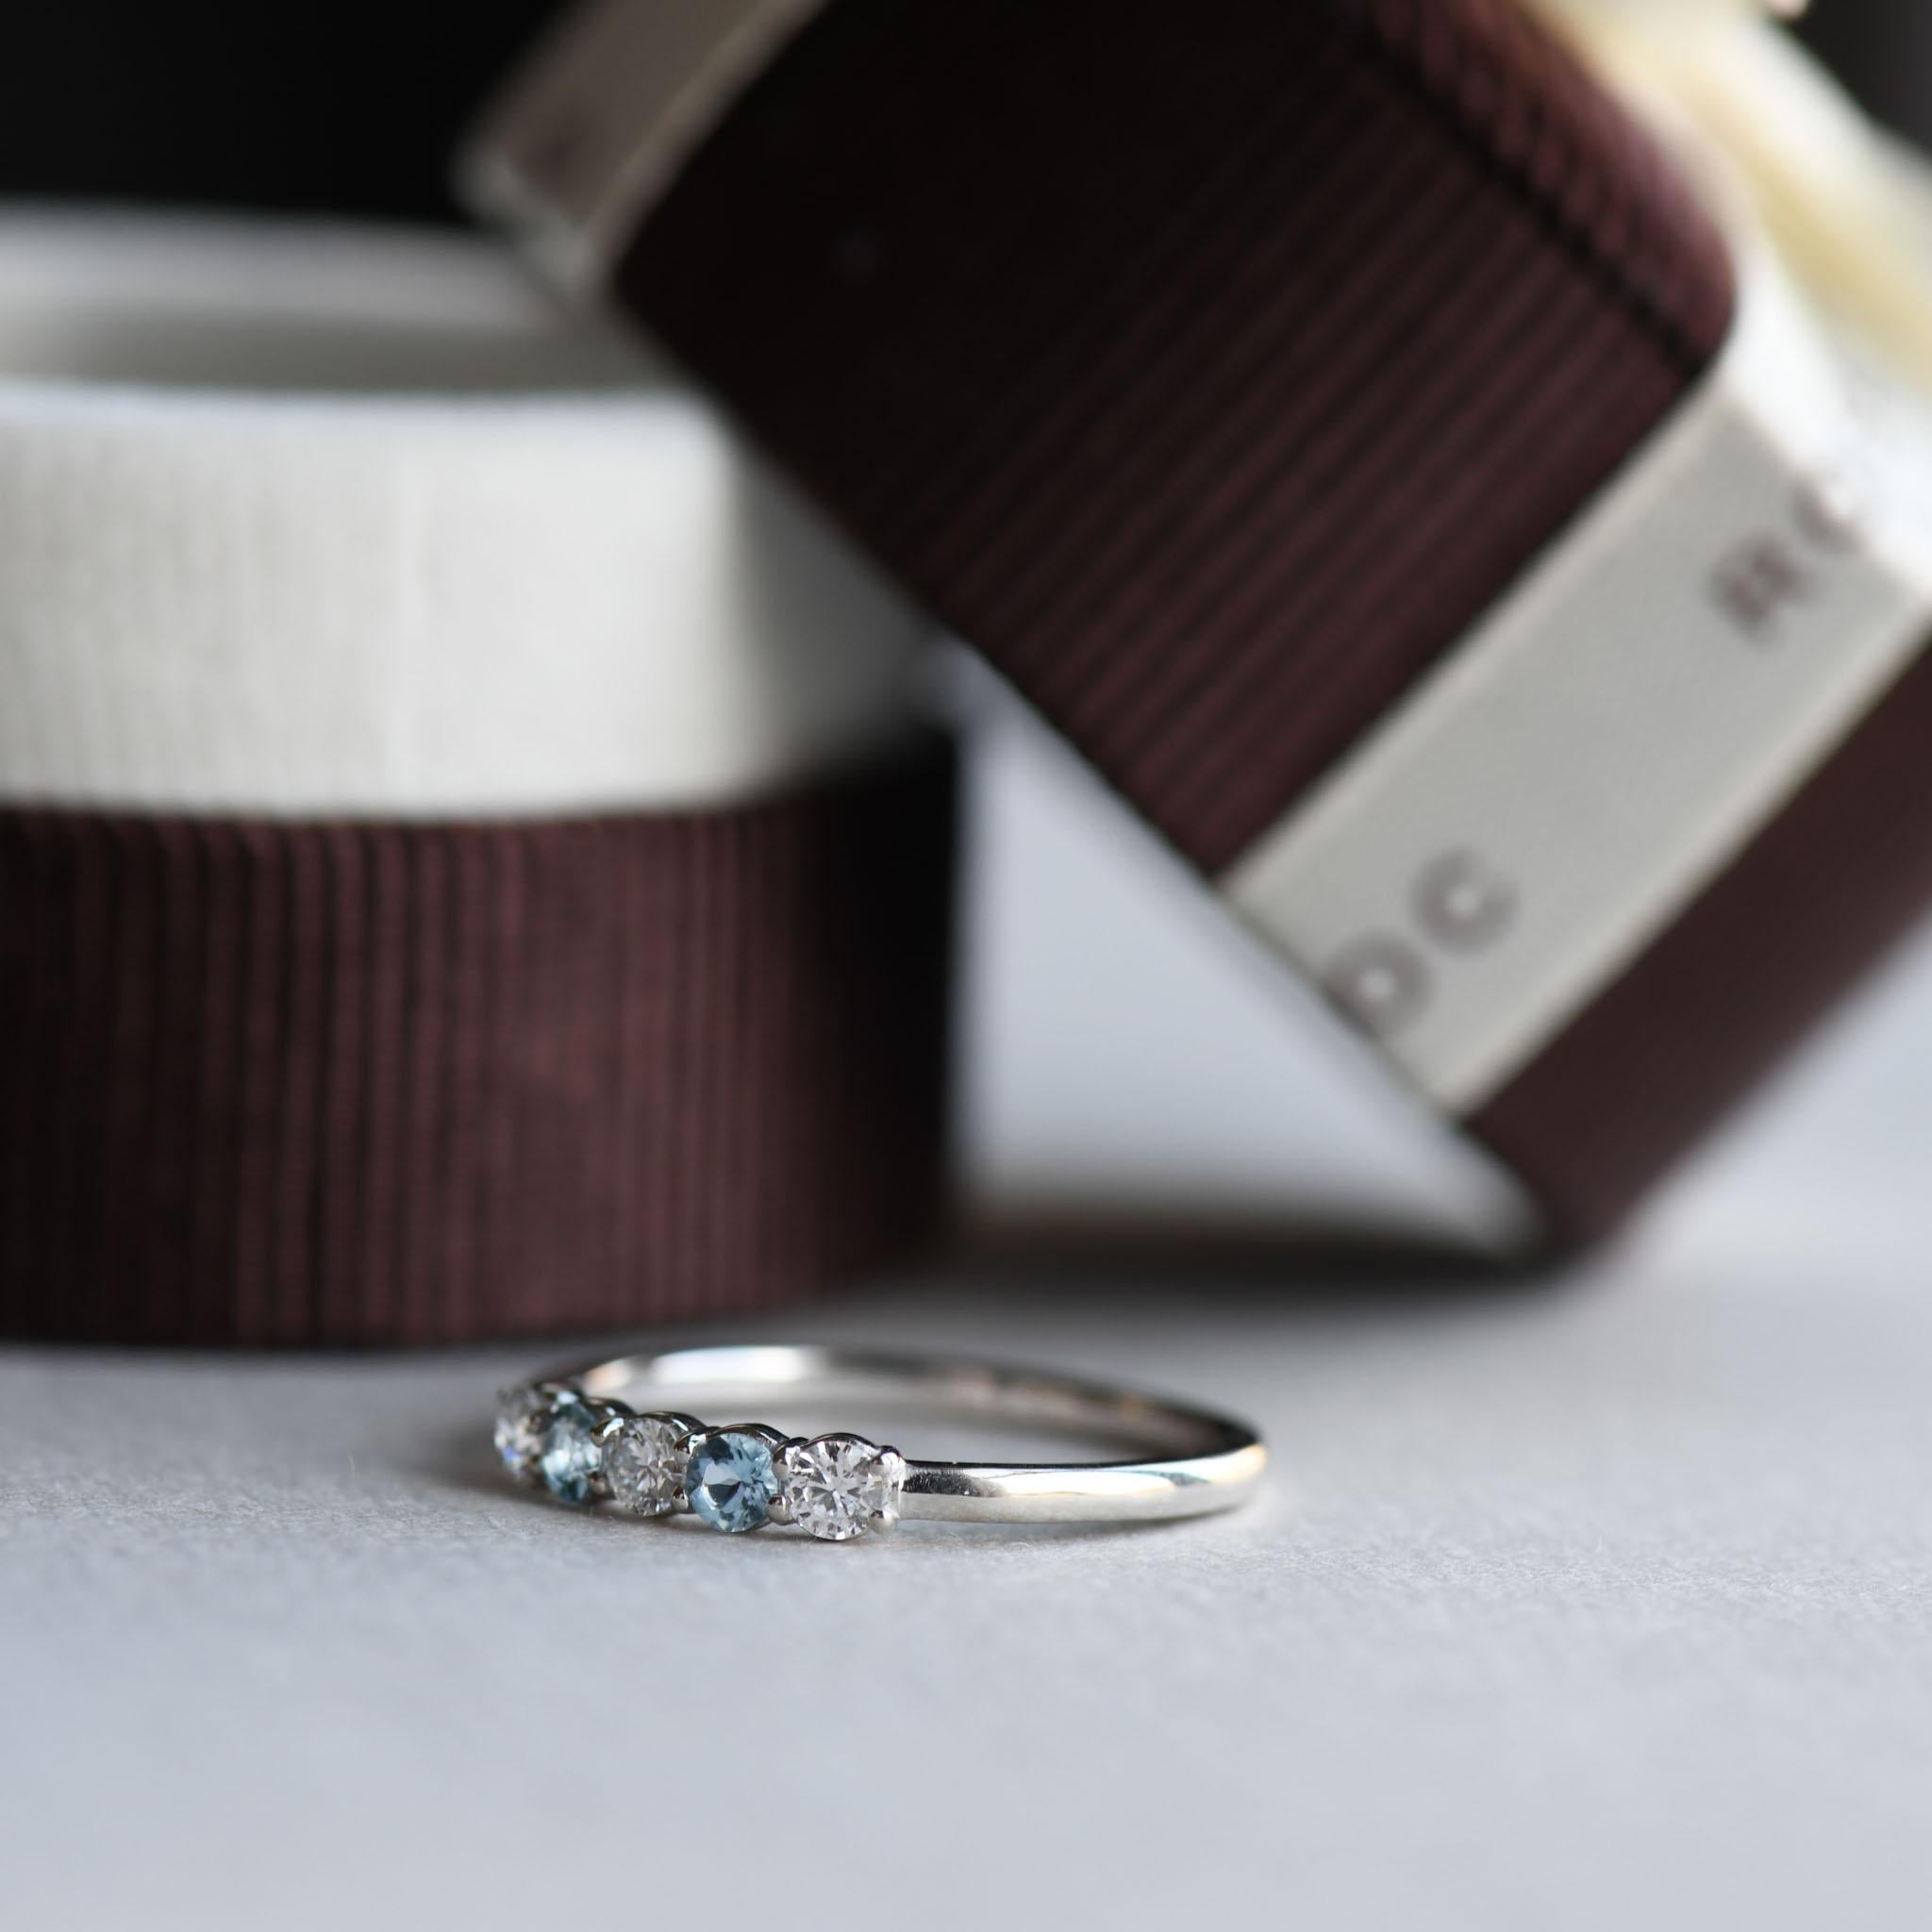 A row of five-stone with diamond and aquamarine set on 14k solid white gold.
Metal Type: 14 karat
Stone Size: 2.5mm stones
Diamond: .05ct per stone/3
Total diamond weight: 0.15ct
Clarity: VS
Color: GHI
Measurement: 1.3mm band width.

All of our